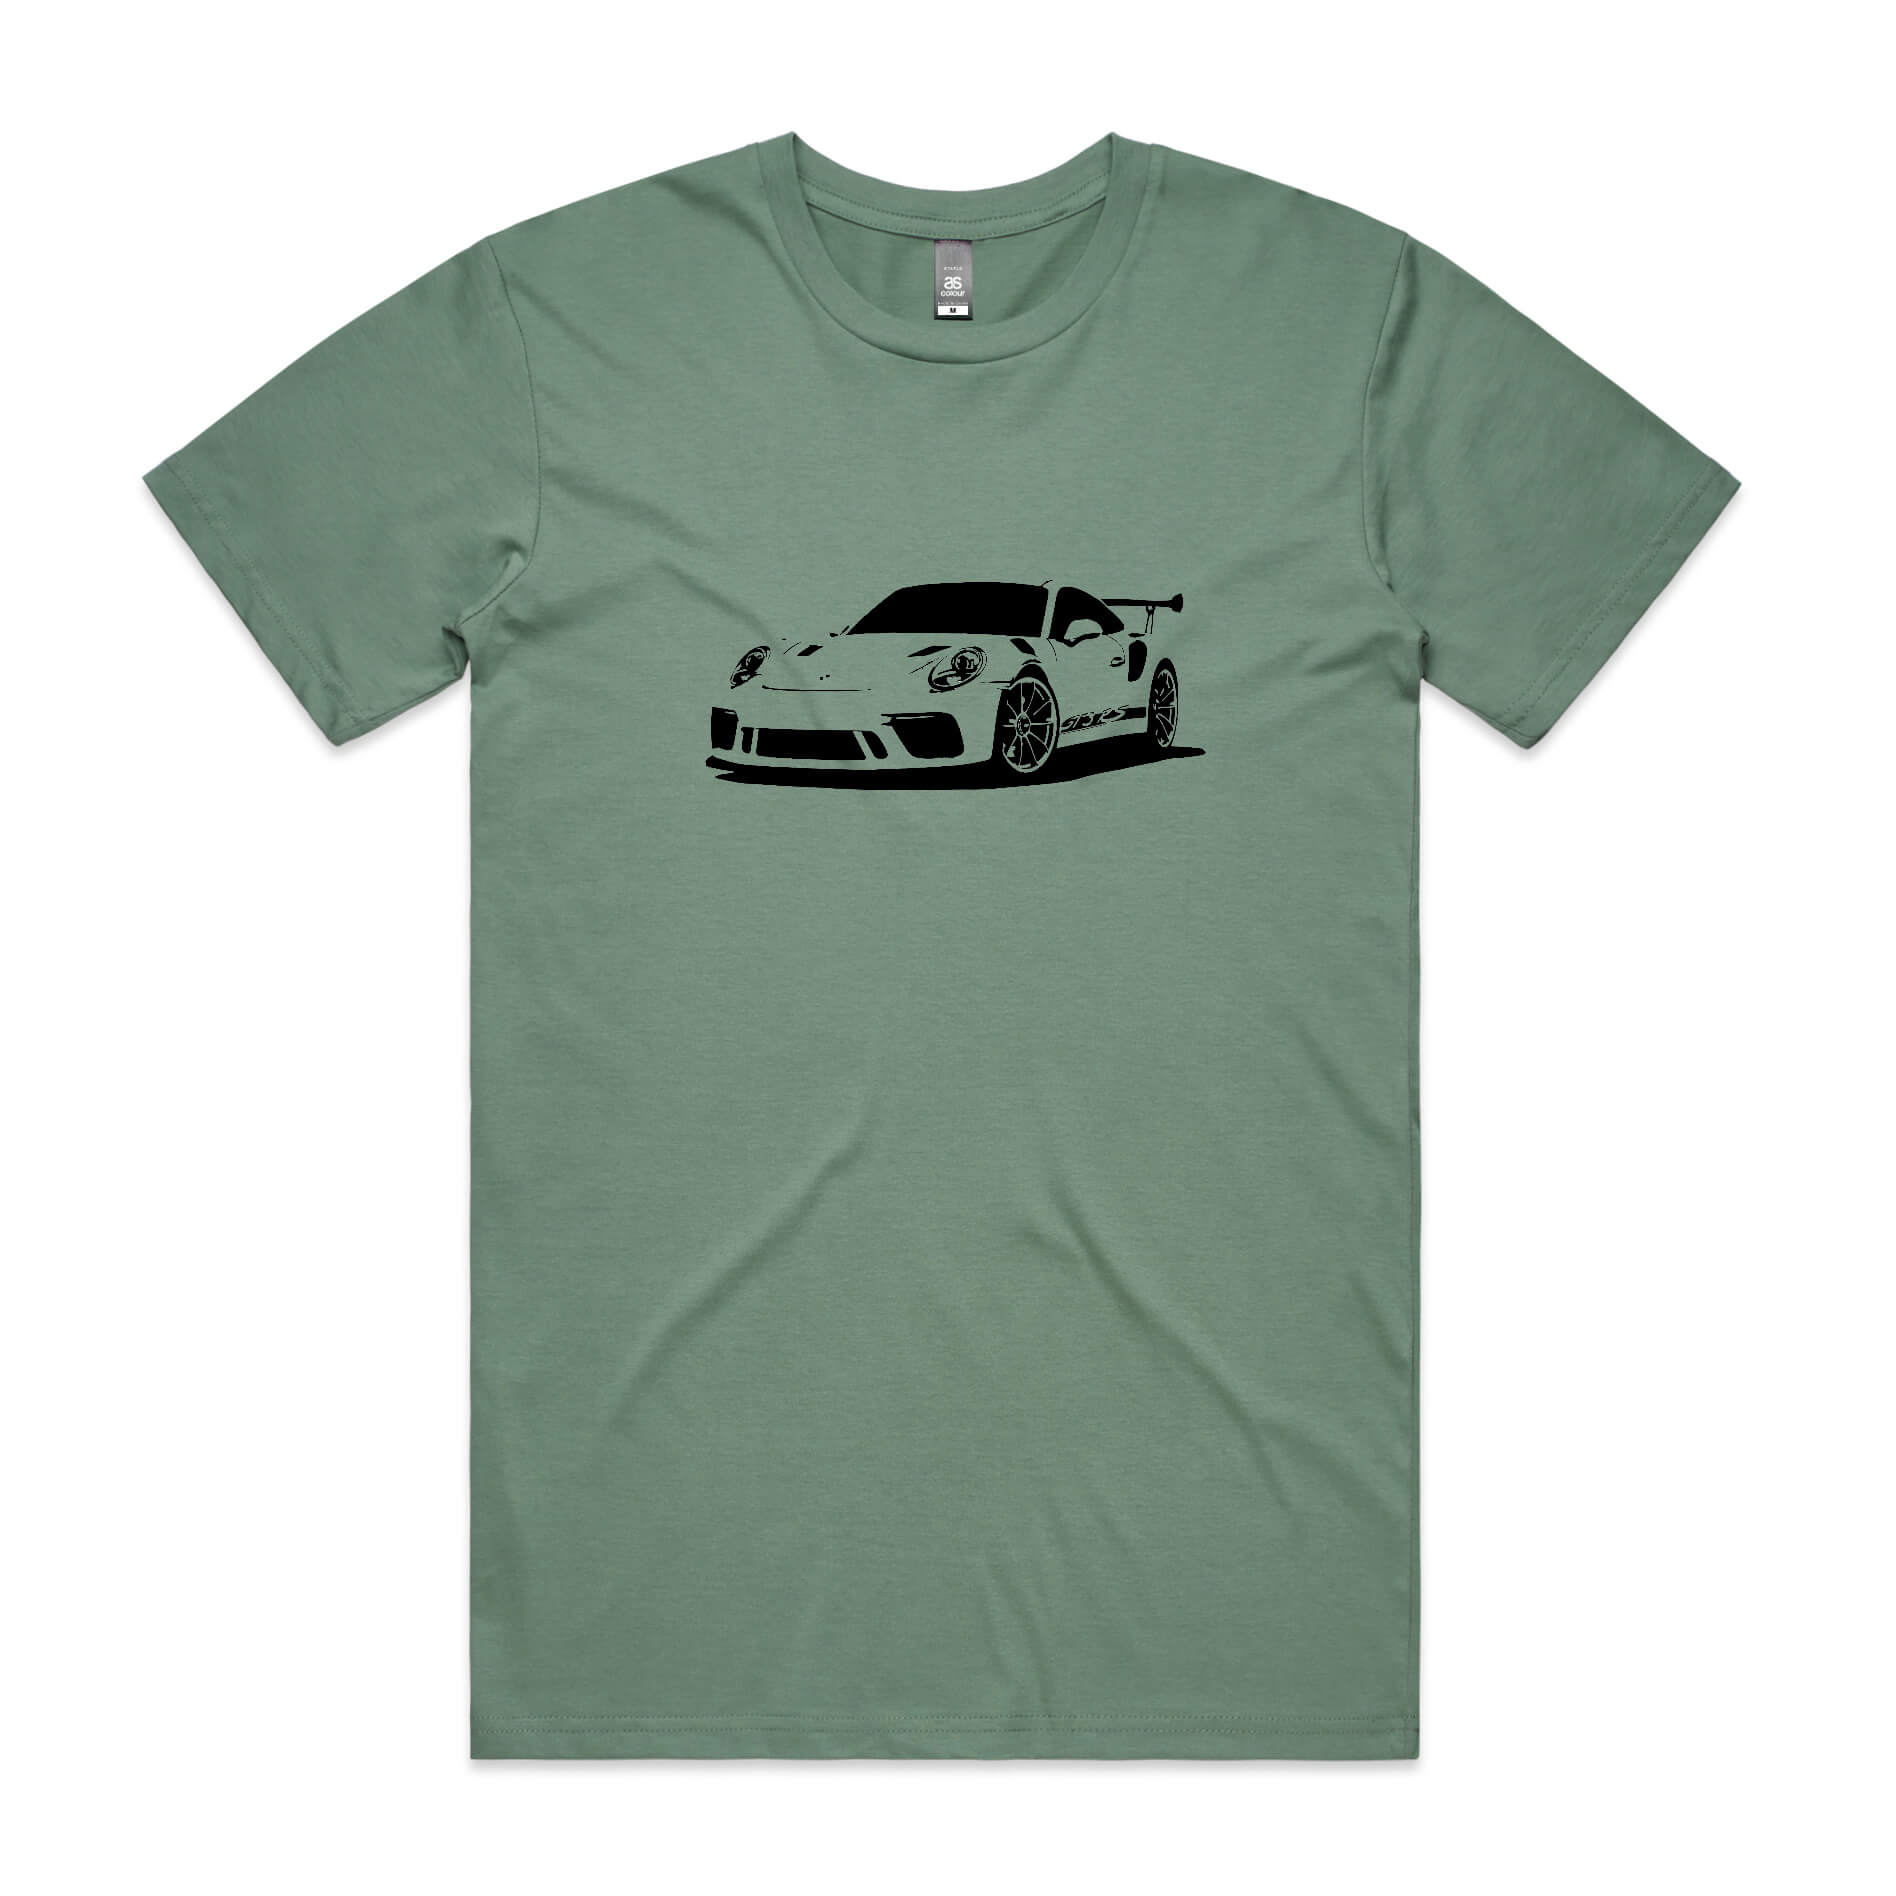 Porsche 911 GT3 RS t-shirt in sage green with a black car graphic